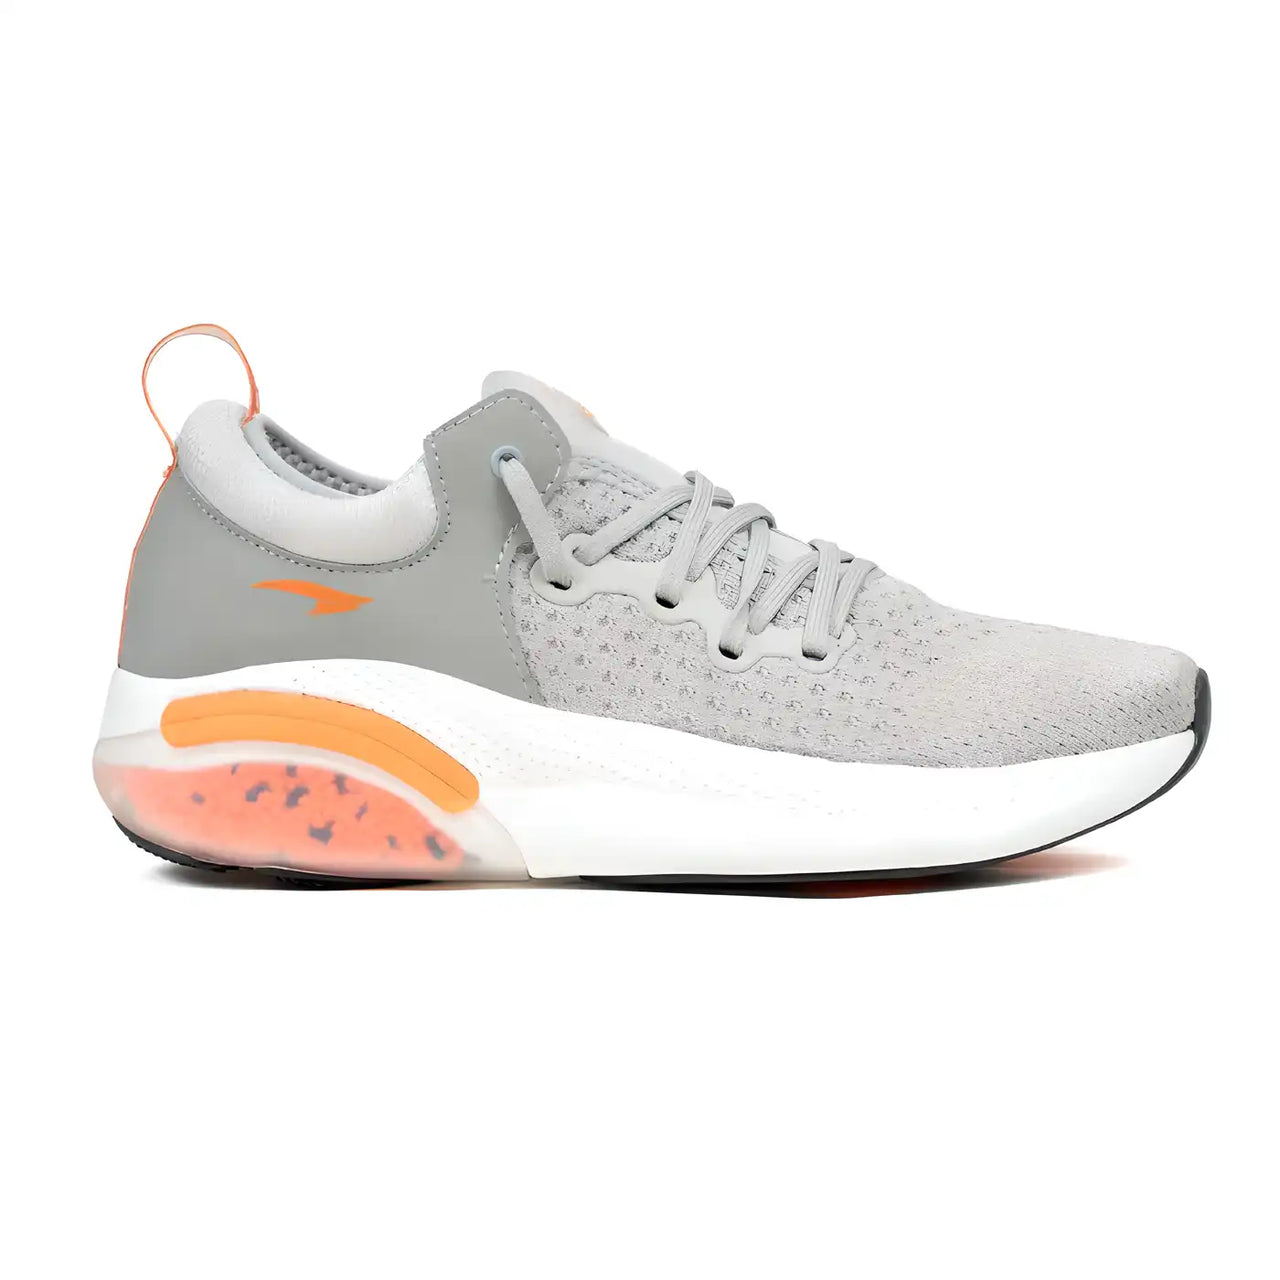 Asian Rider-01 Light grey Sports Shoes